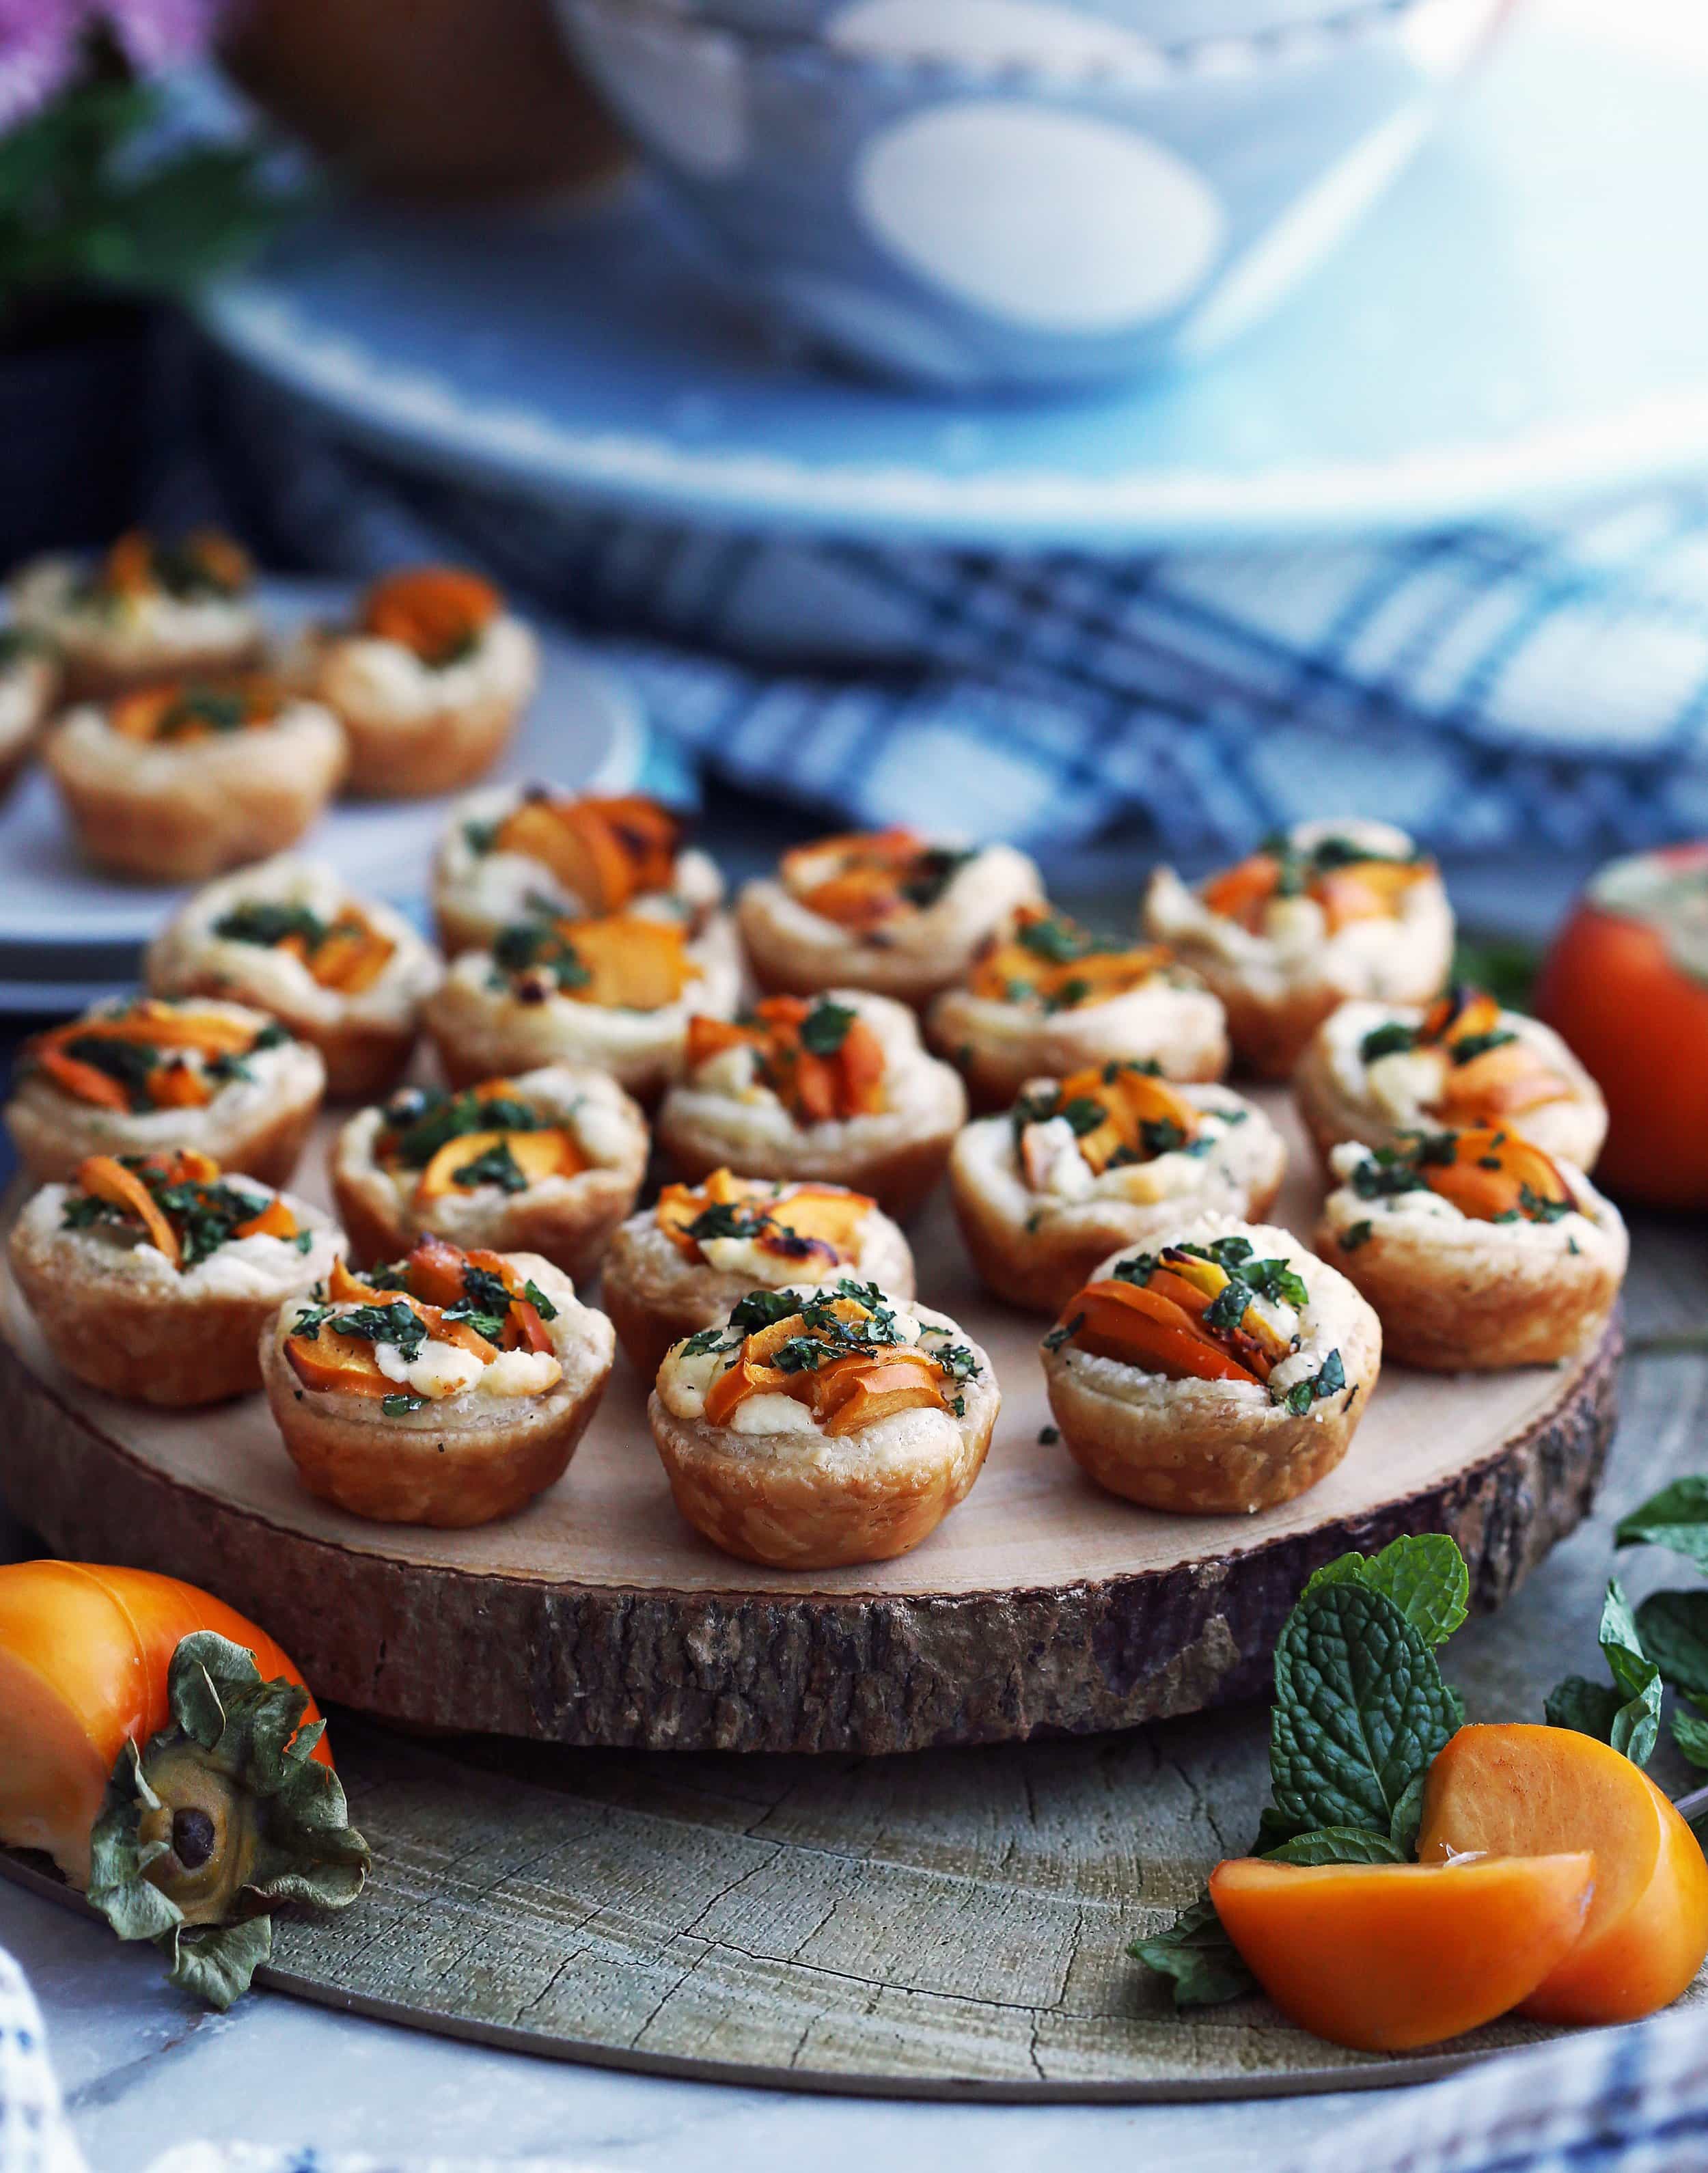 Over a dozen Persimmon Goat Cheese Tartlets garnished with fresh mint on a wooden platter.